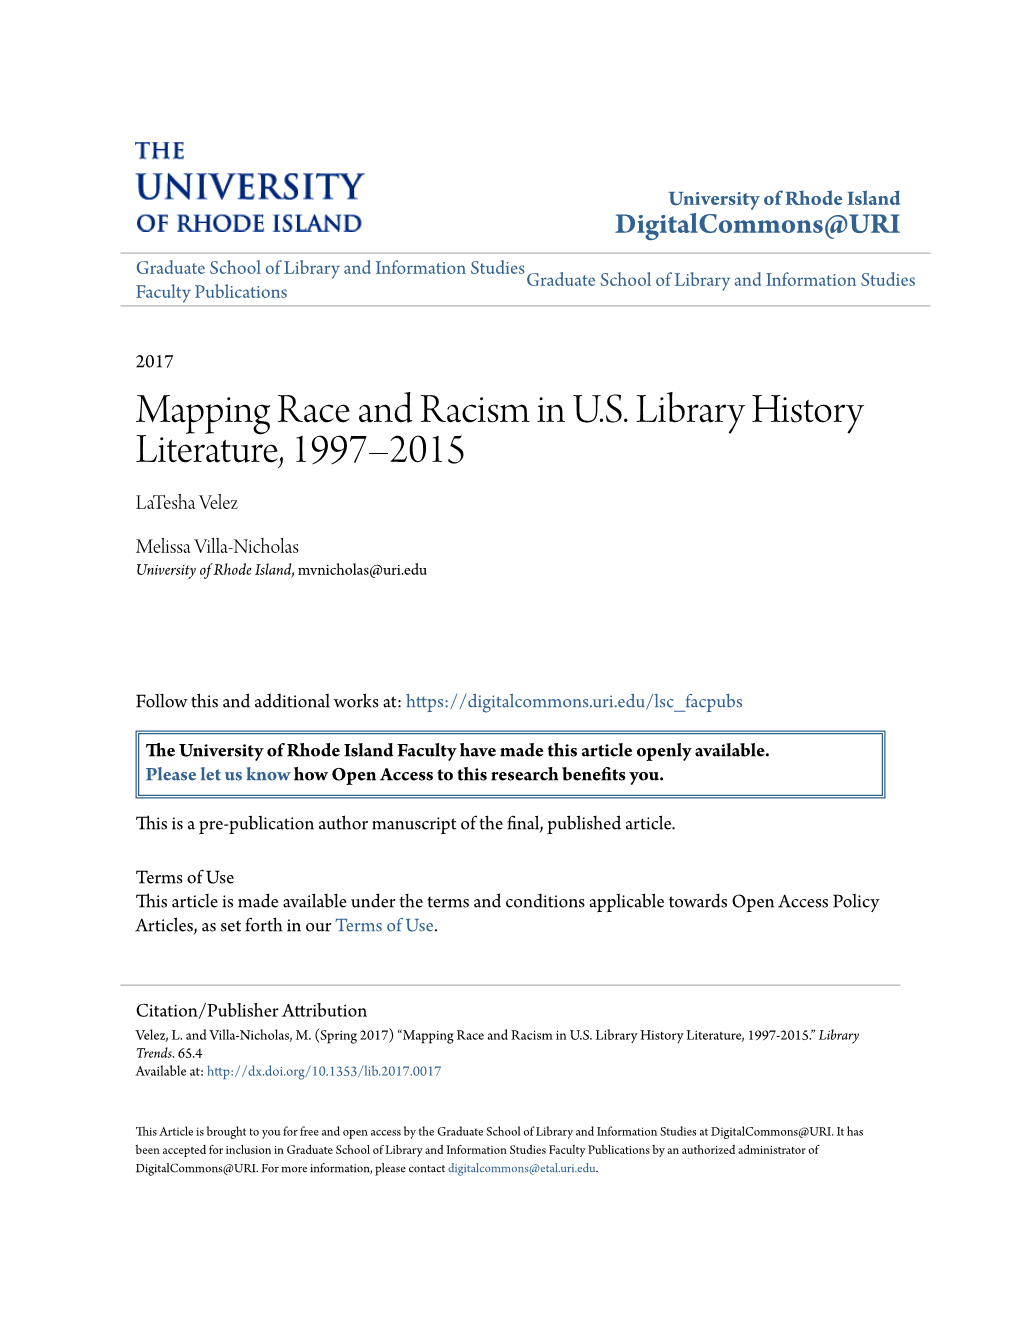 Mapping Race and Racism in U.S. Library History Literature, 1997–2015 Latesha Velez